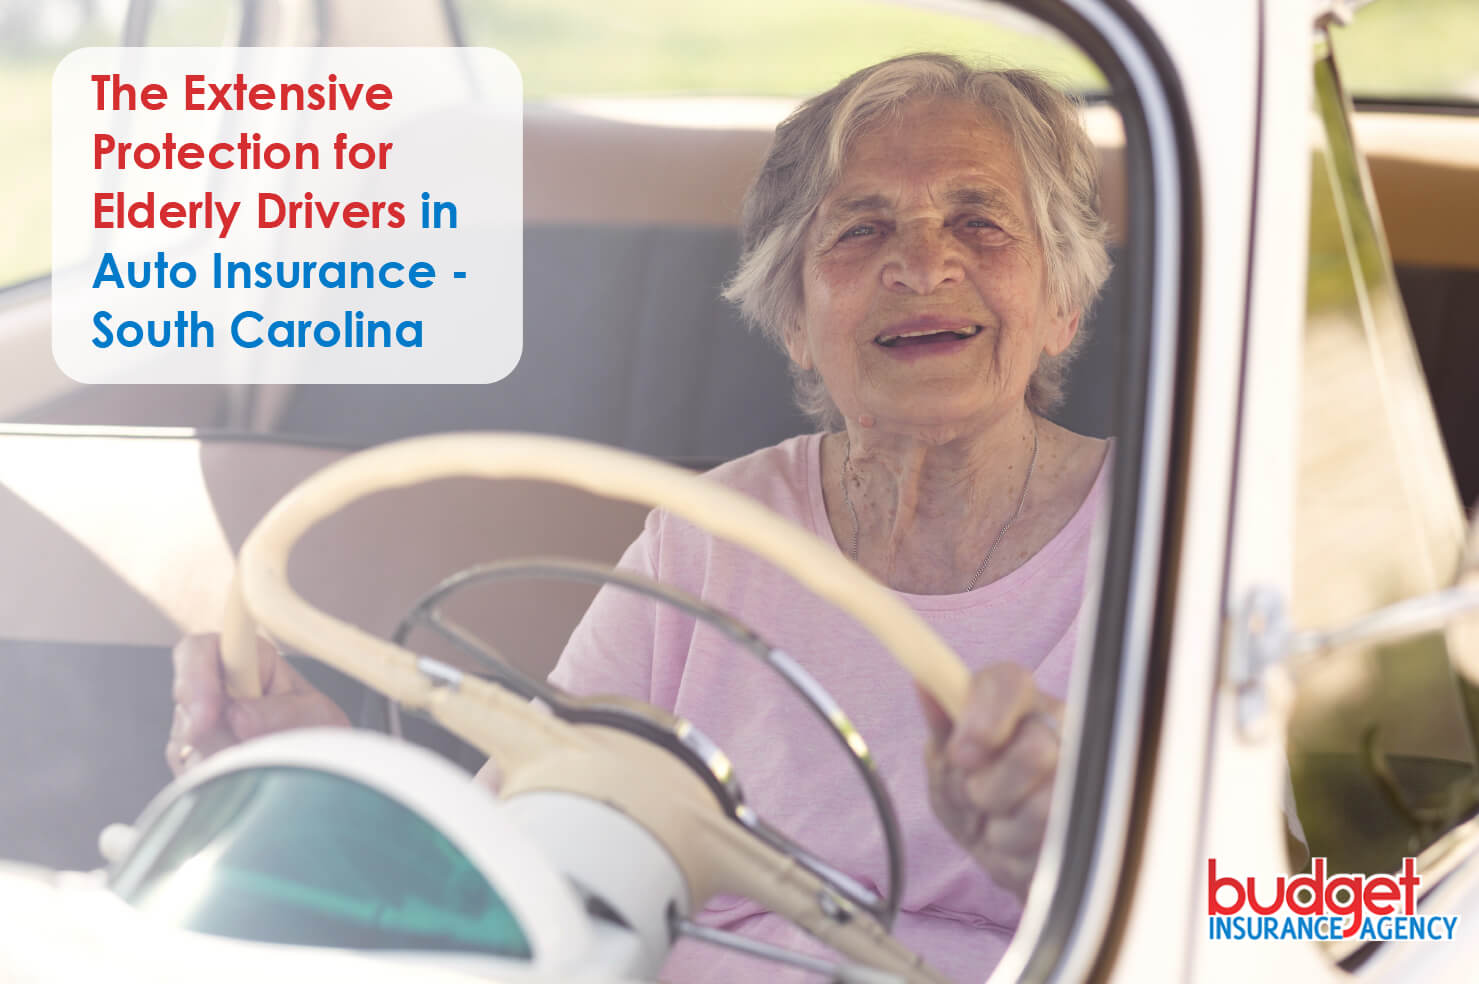 The Extensive Protection for Elderly Drivers in Auto Insurance - South Carolina